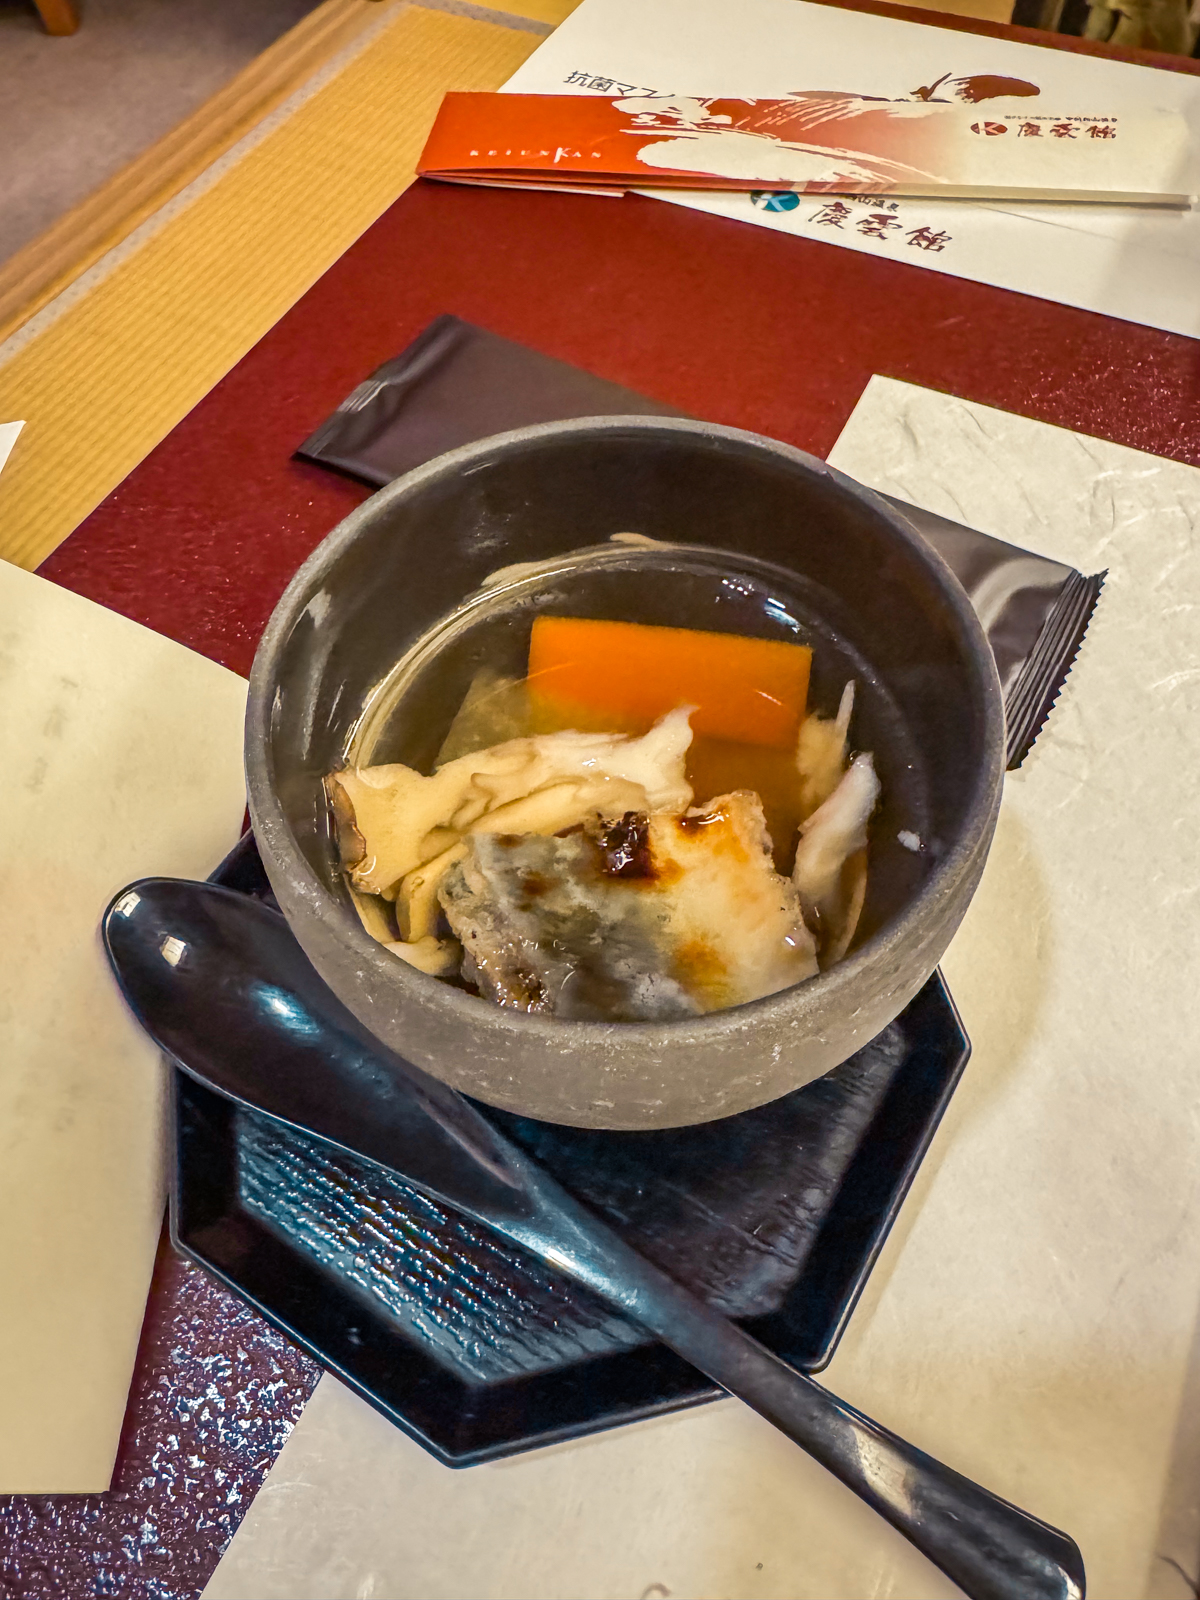 Eel and root vegetable soup in a black stone bowl.